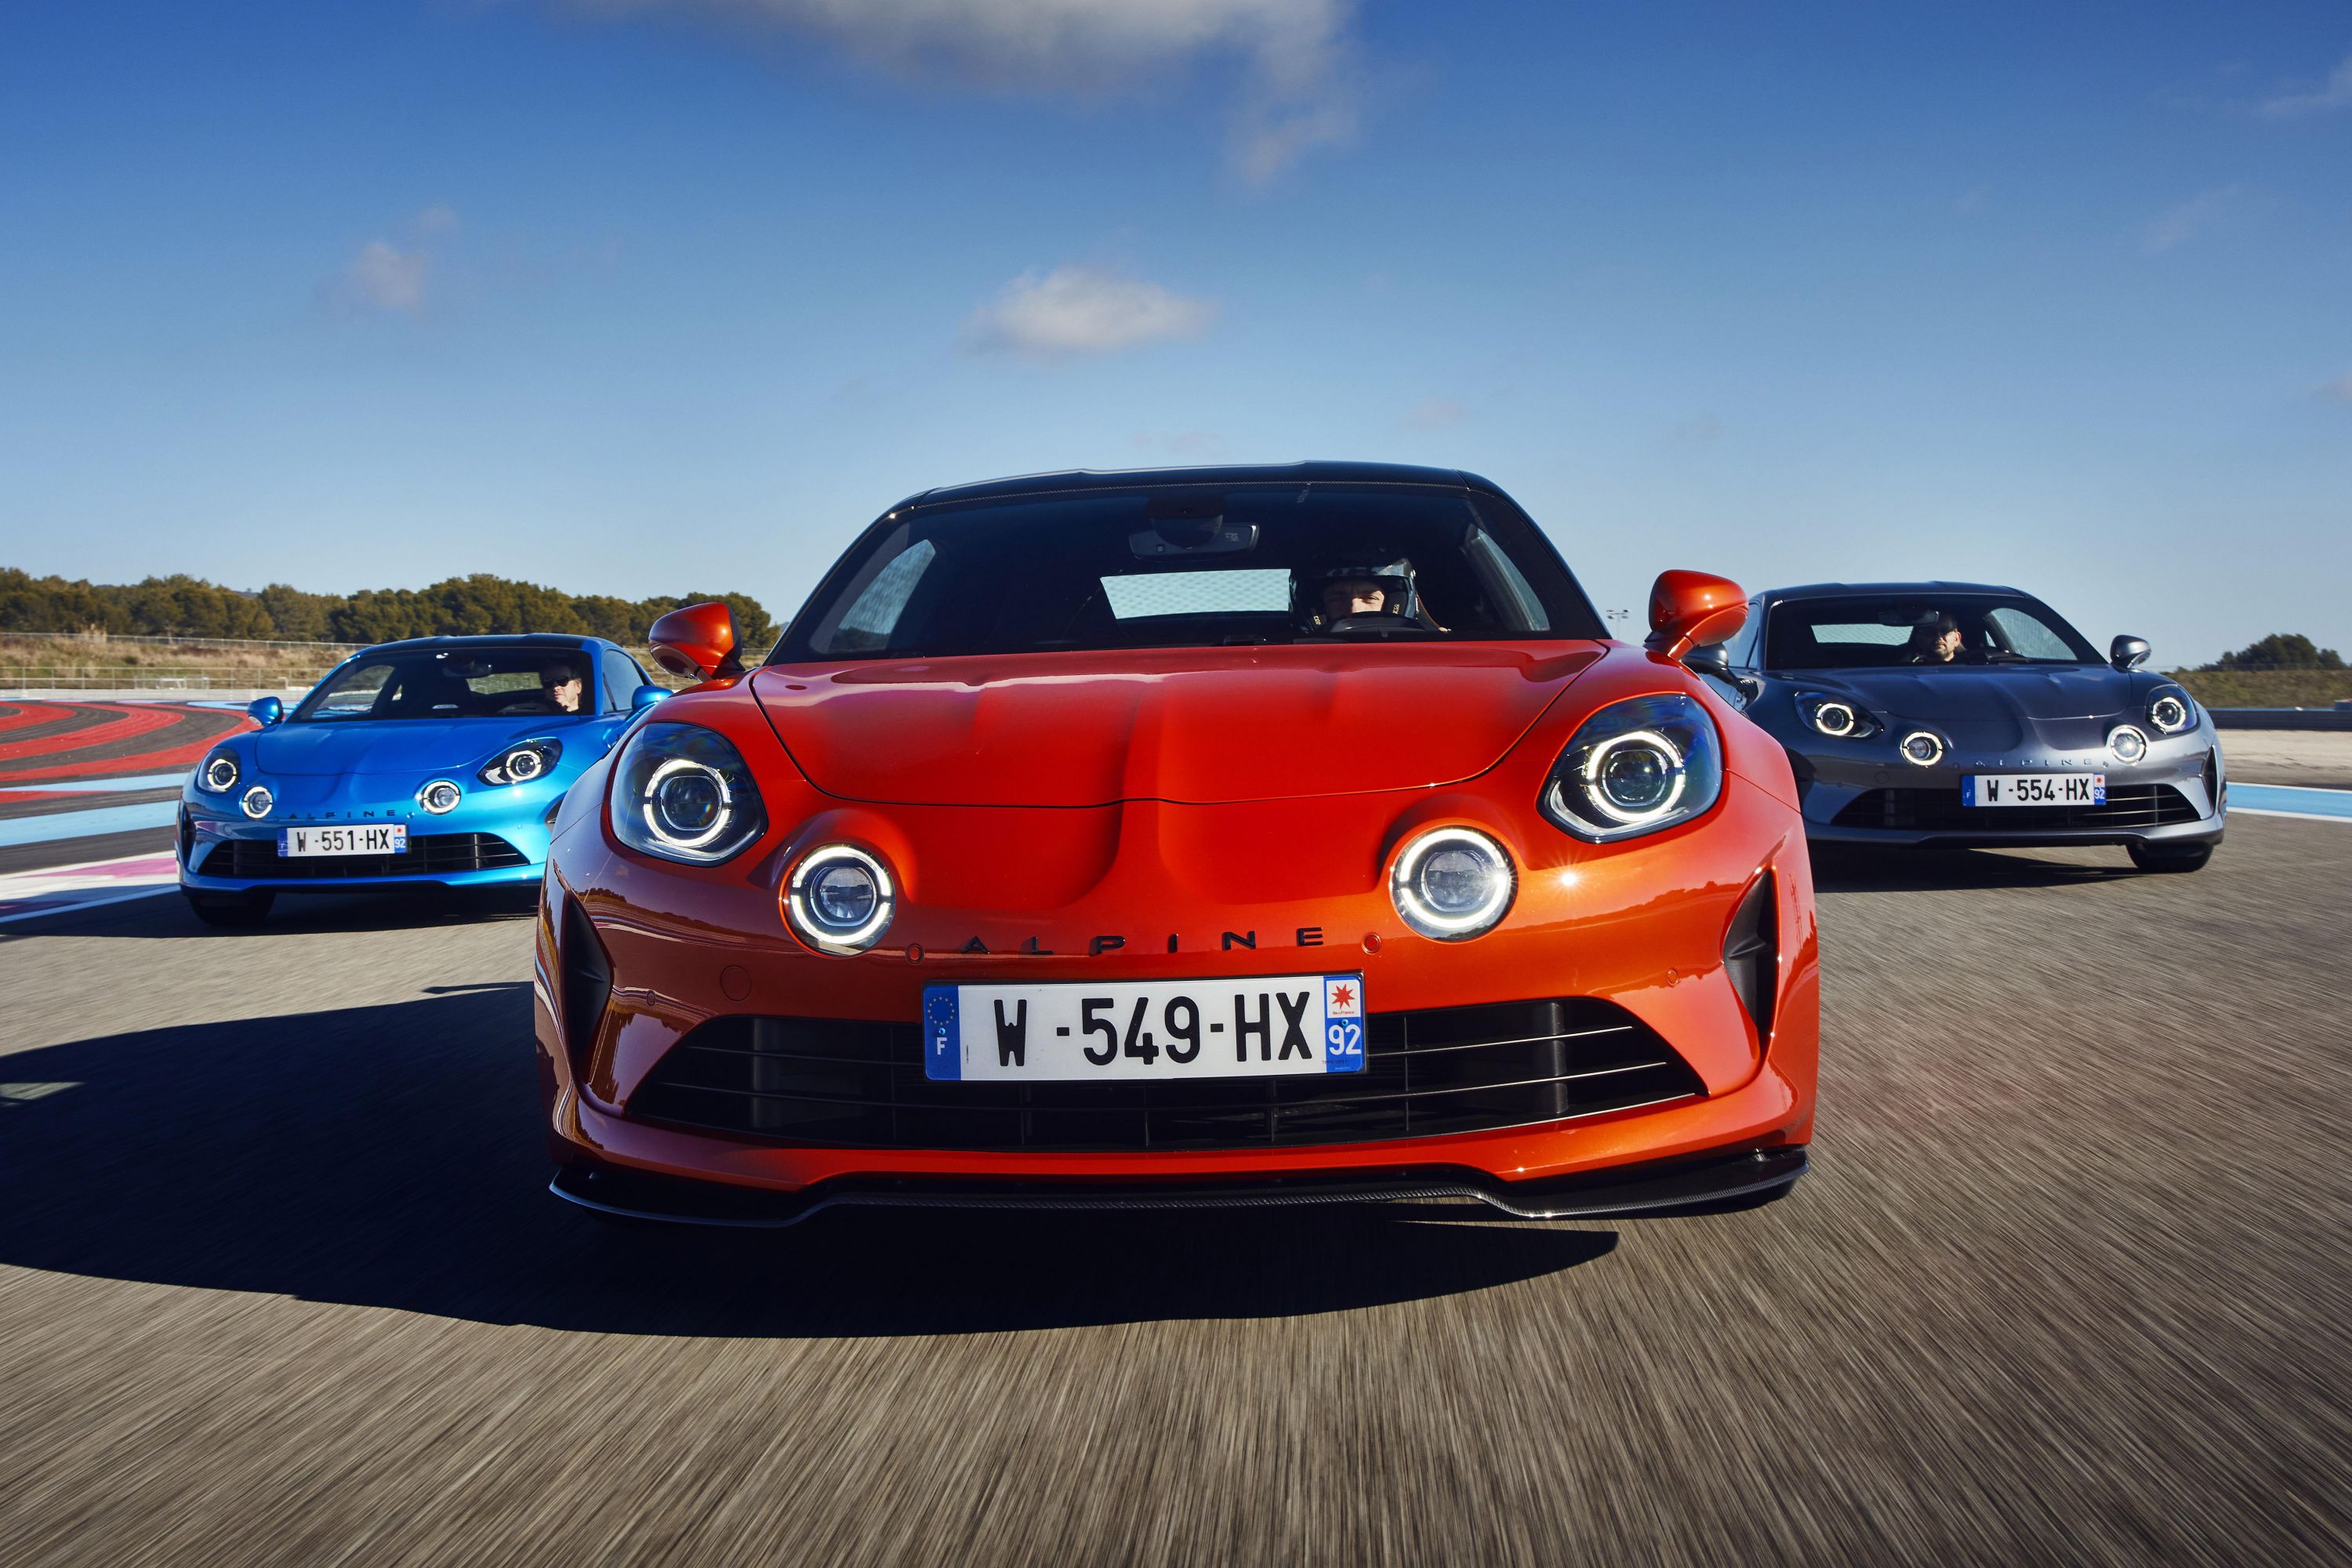 Alpine CEO on electric A110 replacement and future models